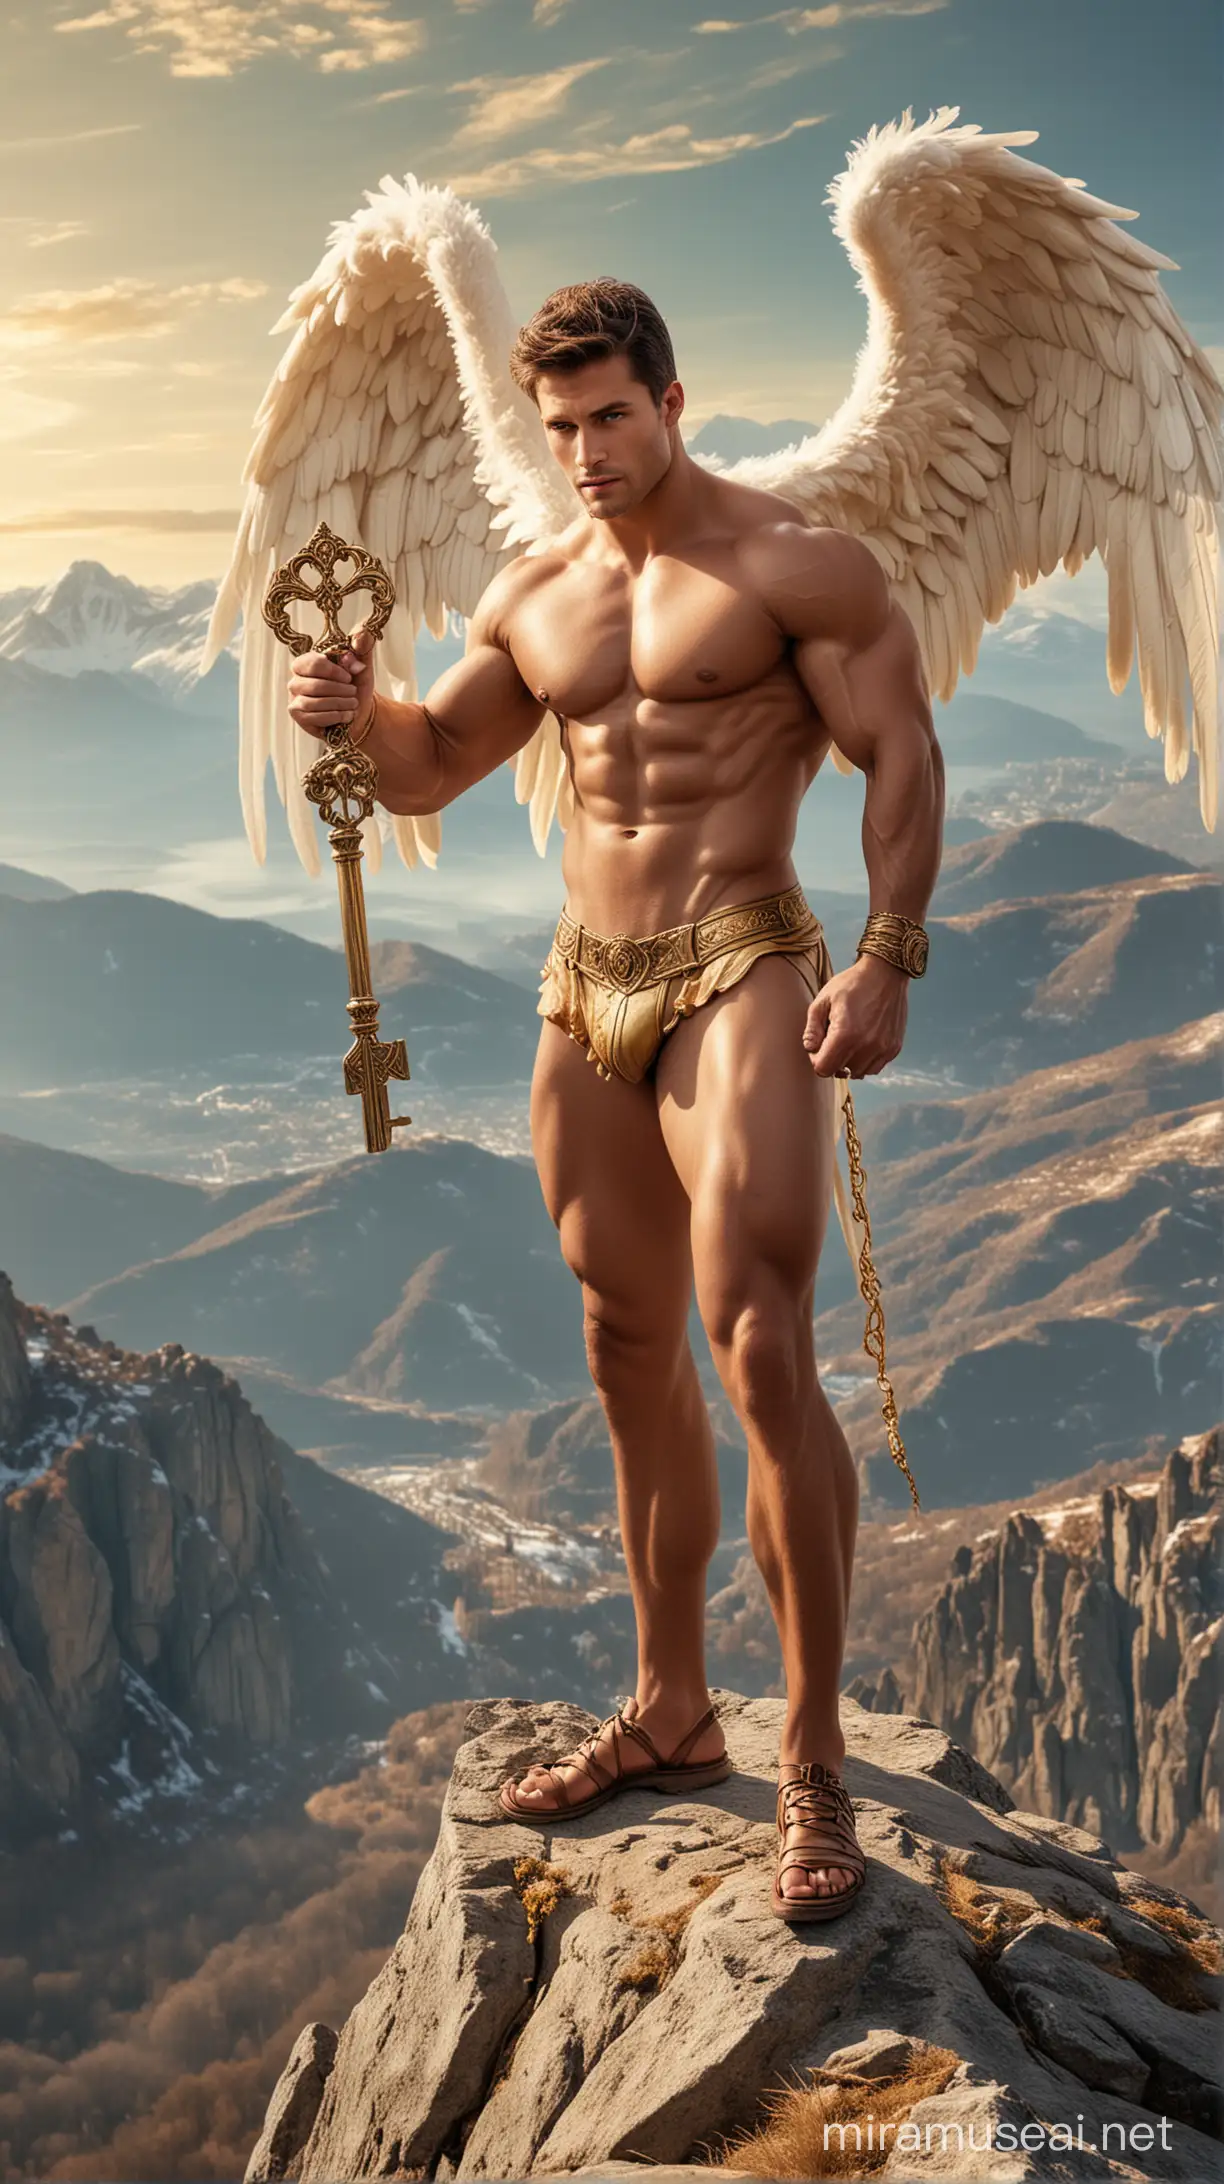 Powerful Male Angel with Golden Key atop Mountain Peak